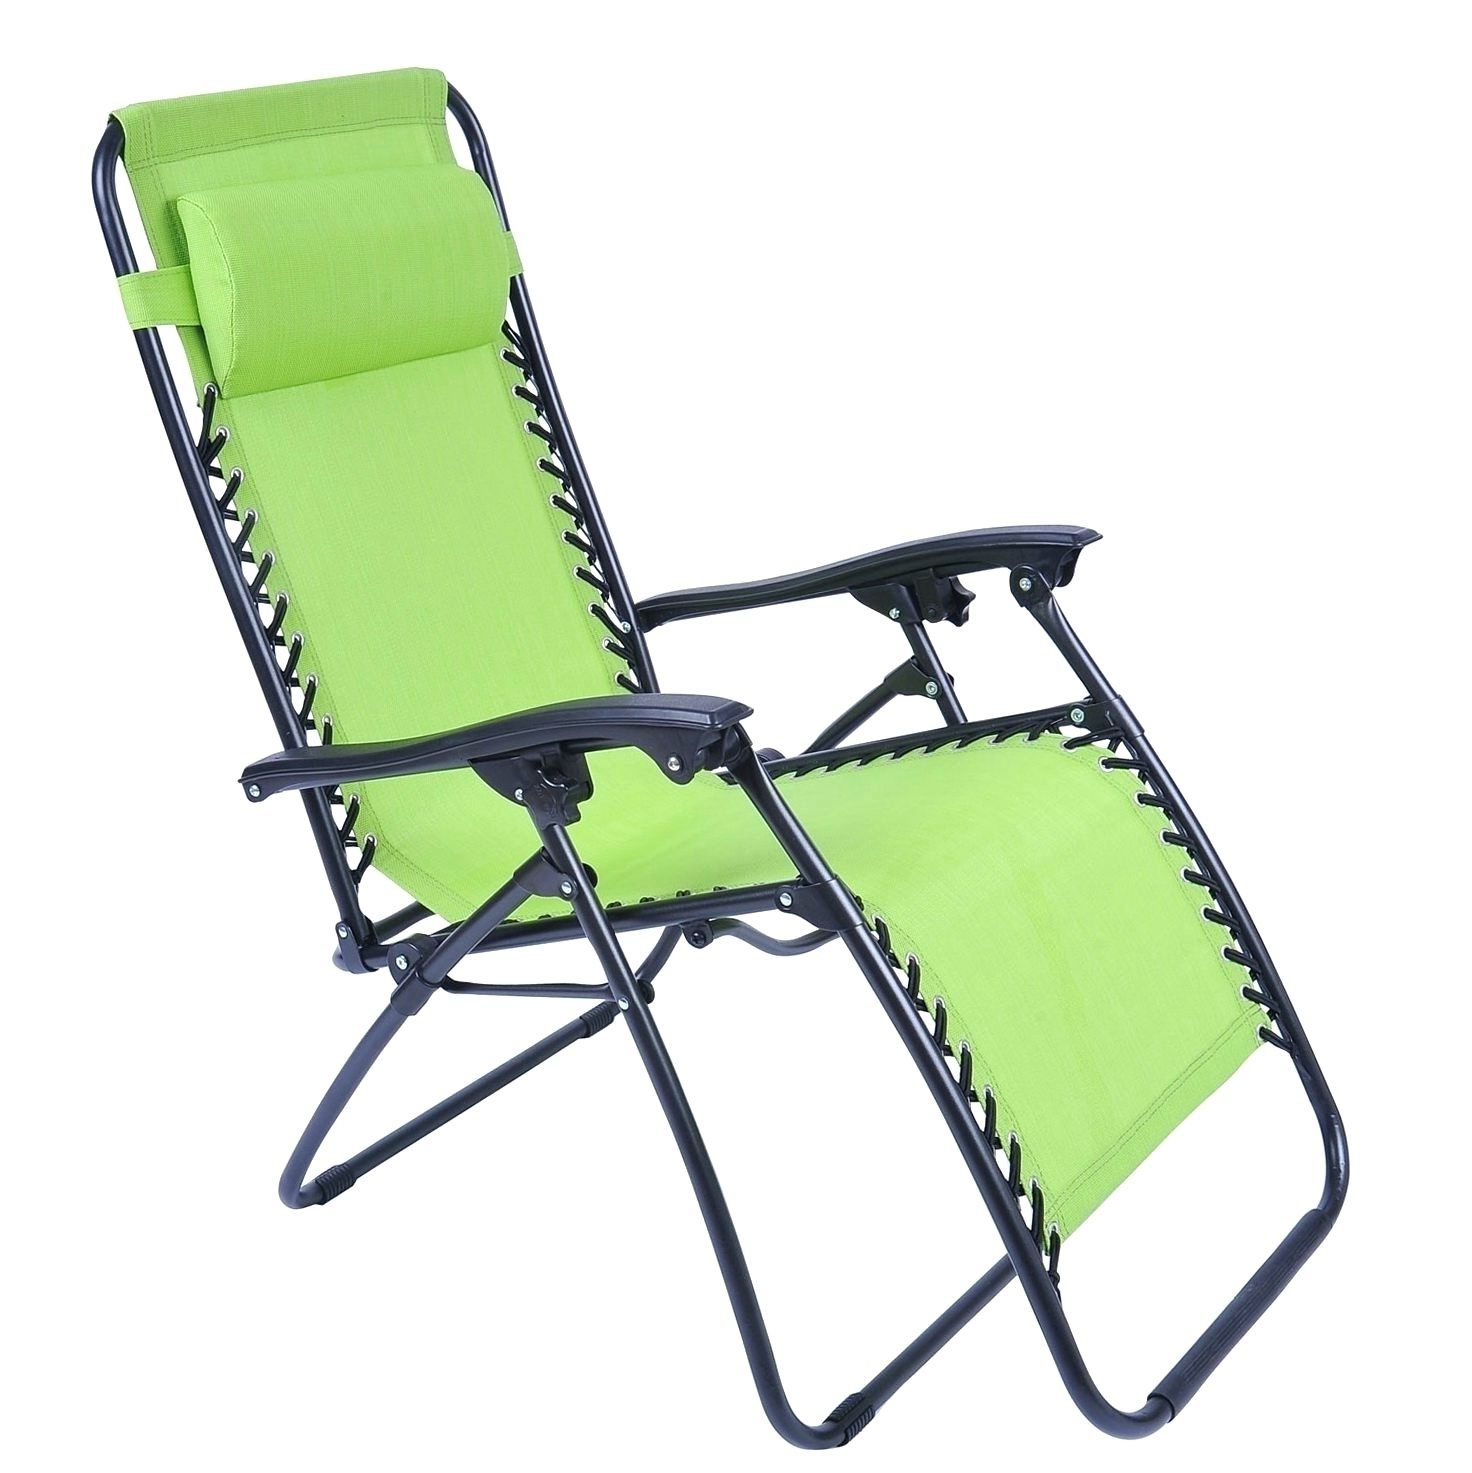 Heavy Duty Chaise Lounge Chairs Within Best And Newest Heavy Duty Patio Lounge Chairs • Lounge Chairs Ideas (View 1 of 15)